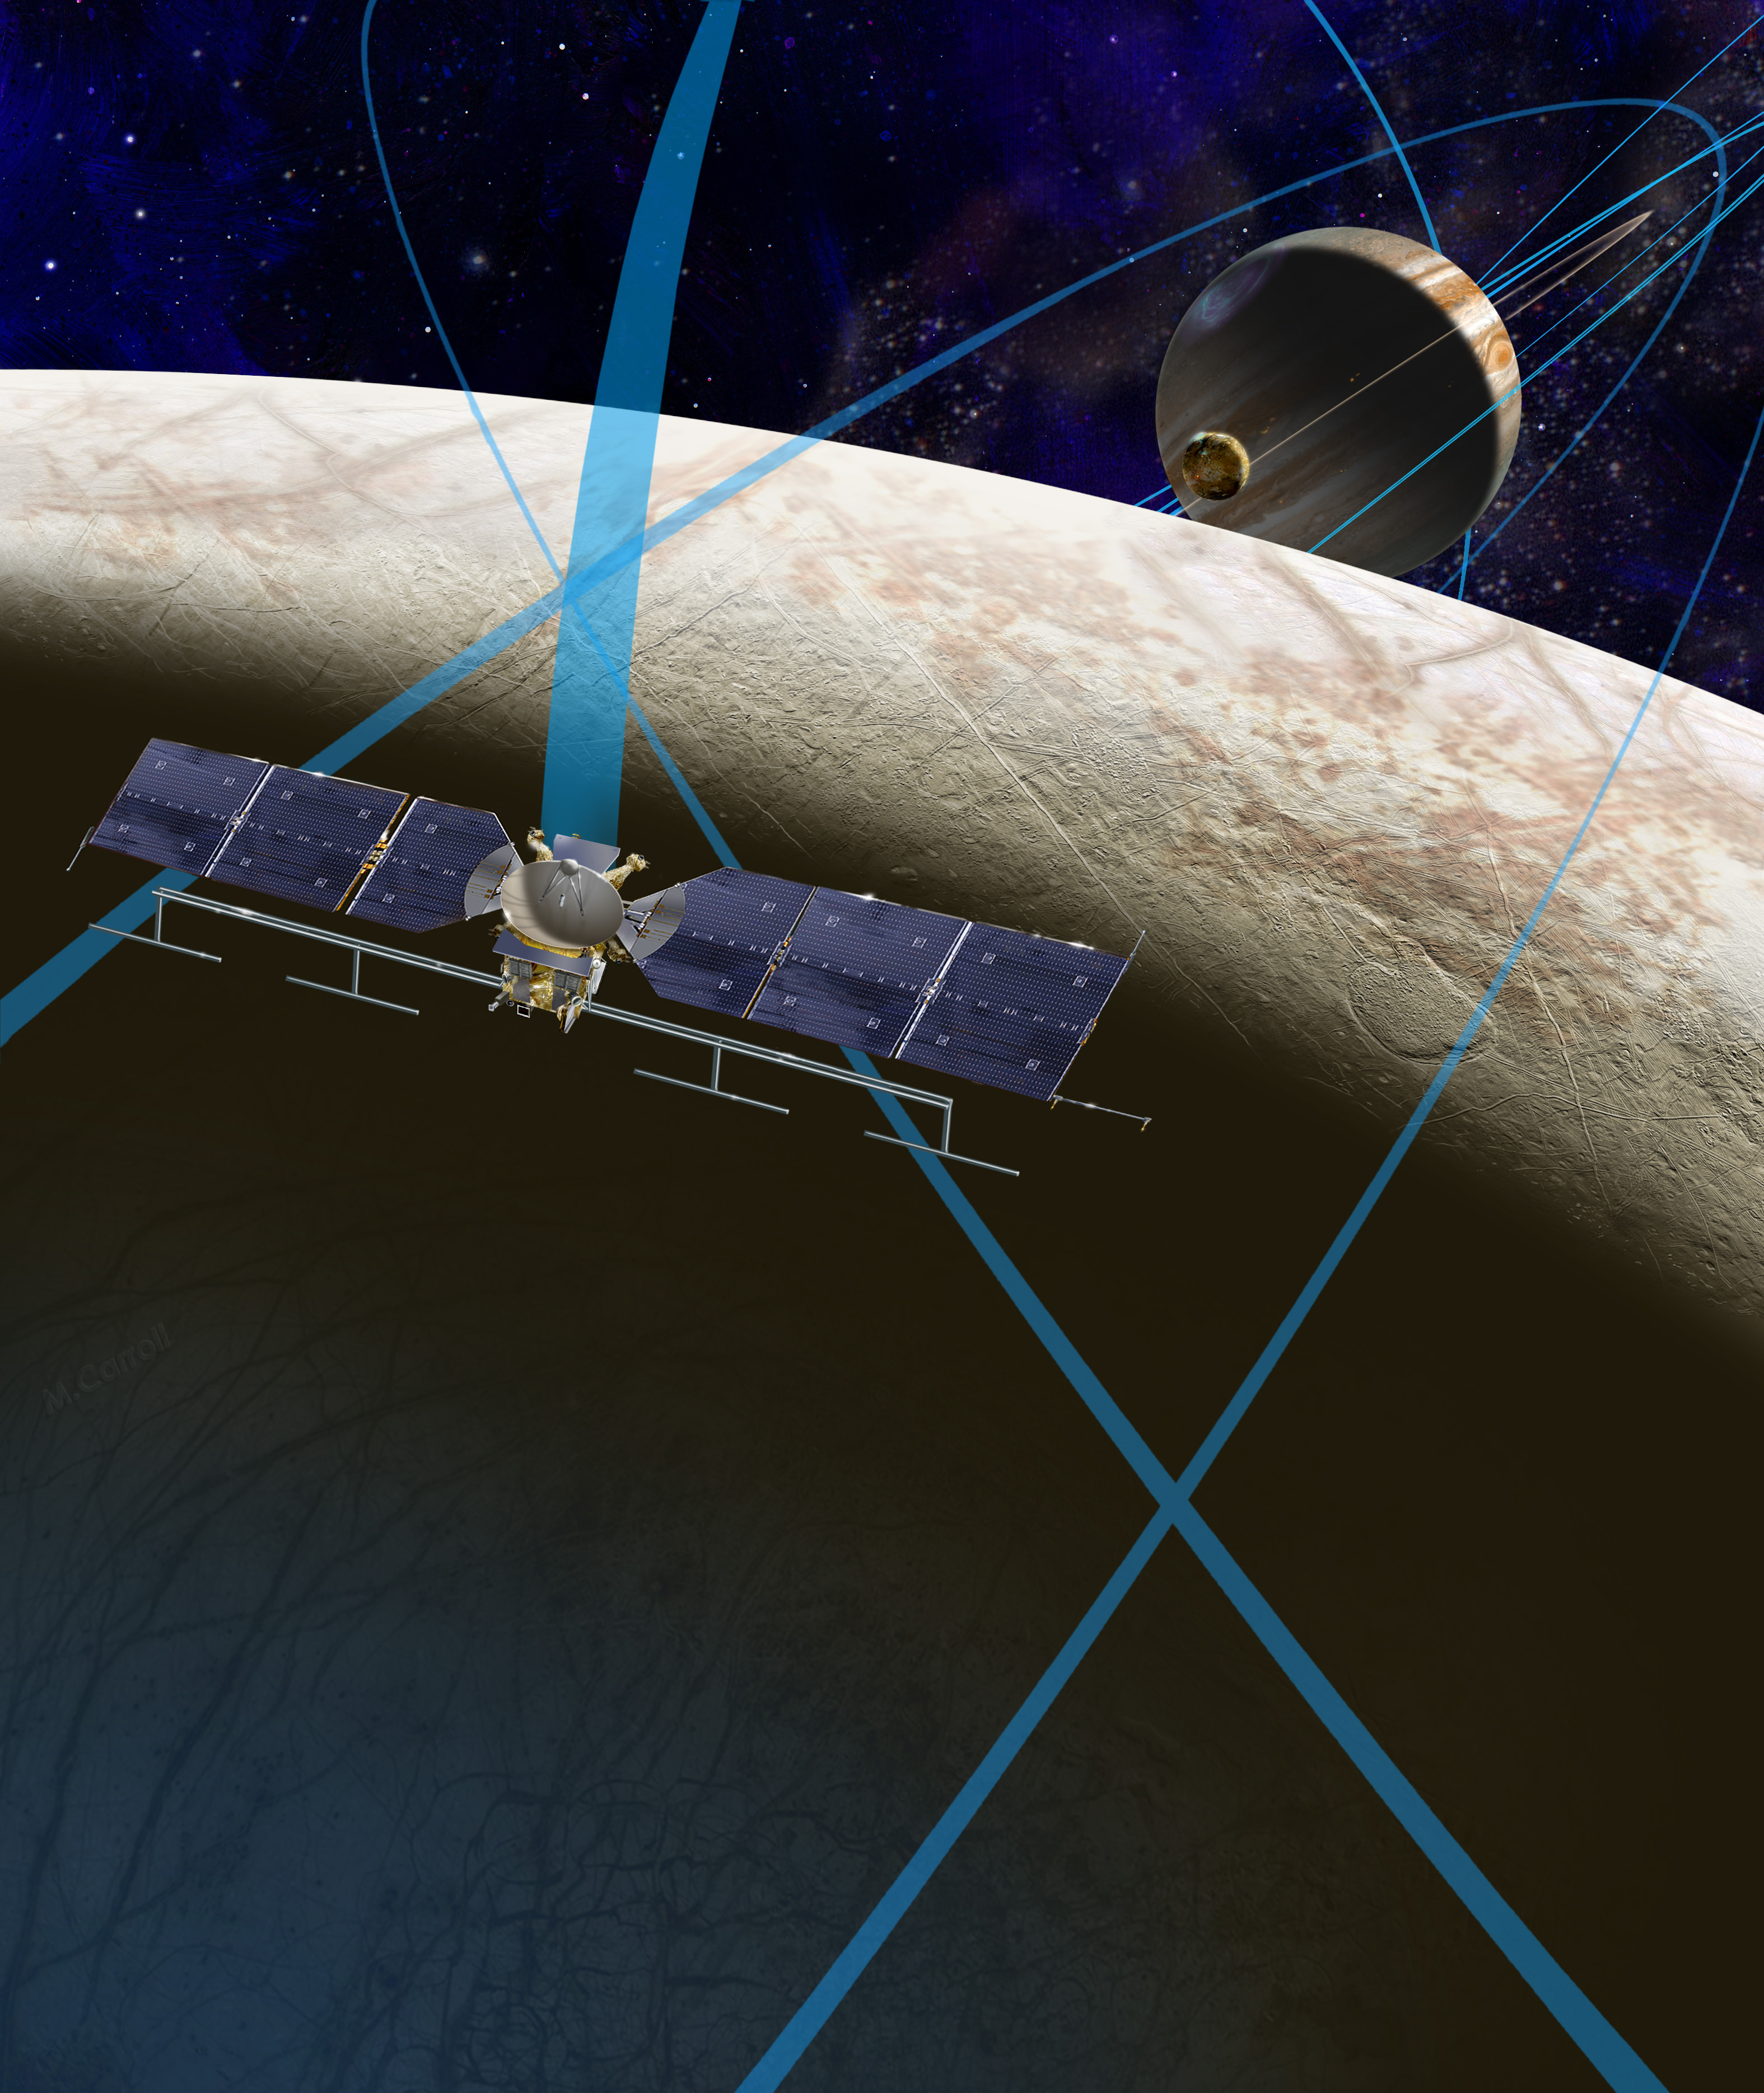 This artist's rendering shows a concept for a future NASA mission to Europa in which a spacecraft would make multiple close flybys of the icy Jovian moon, thought to contain a global subsurface ocean.  Credits: NASA/JPL-Caltech